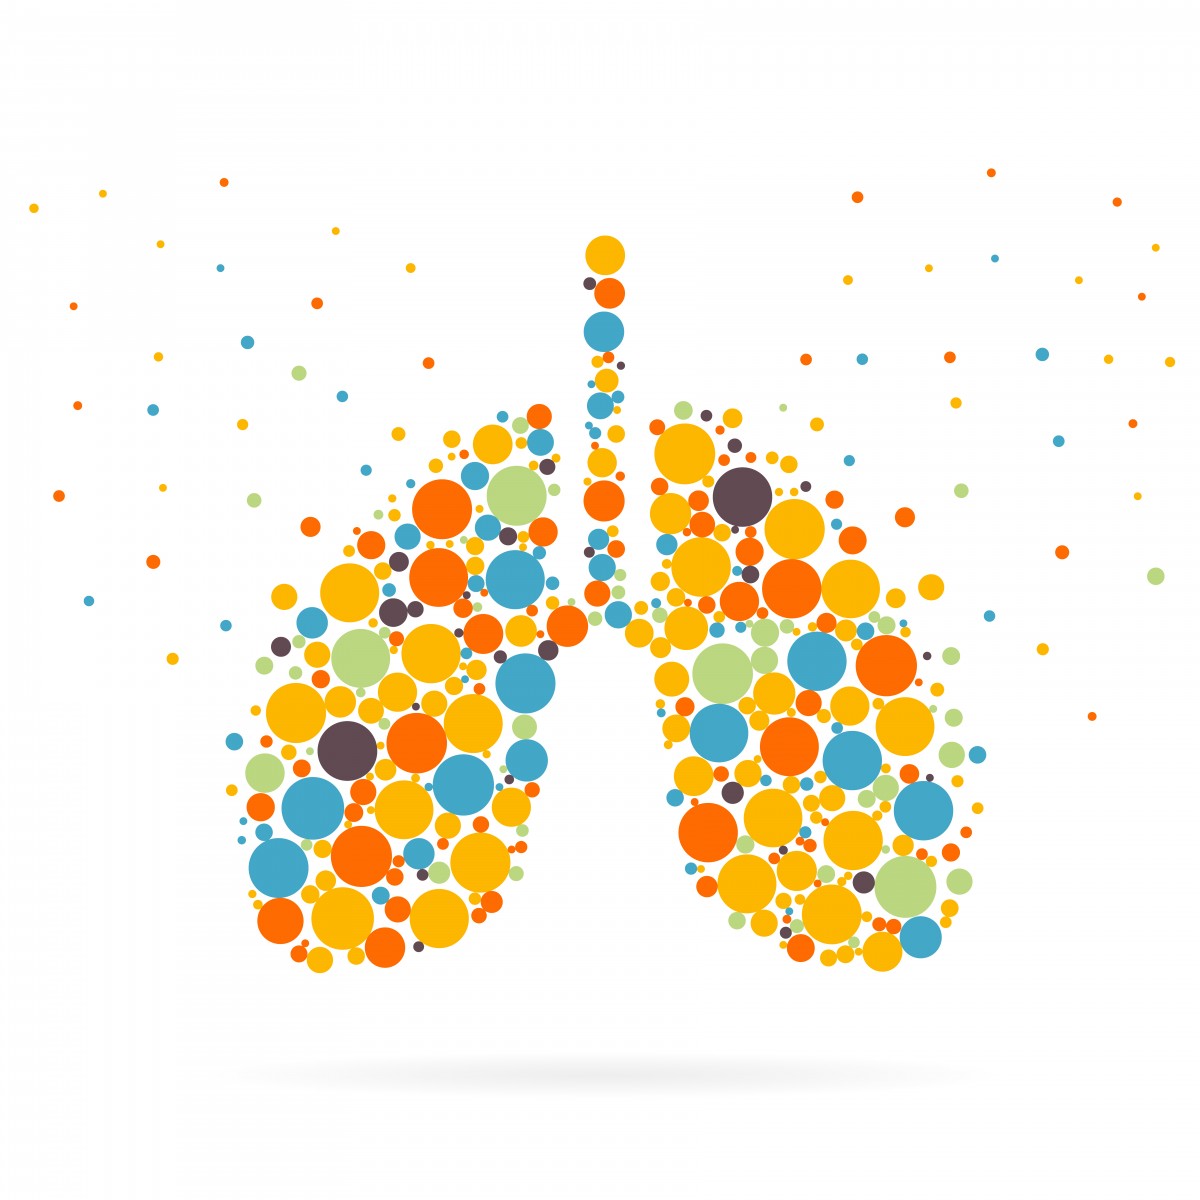 Aradigm Corporation Announces Completion of Enrollment in Phase III Study of Pulmaquin in Non-Cystic Fibrosis Bronchiectasis